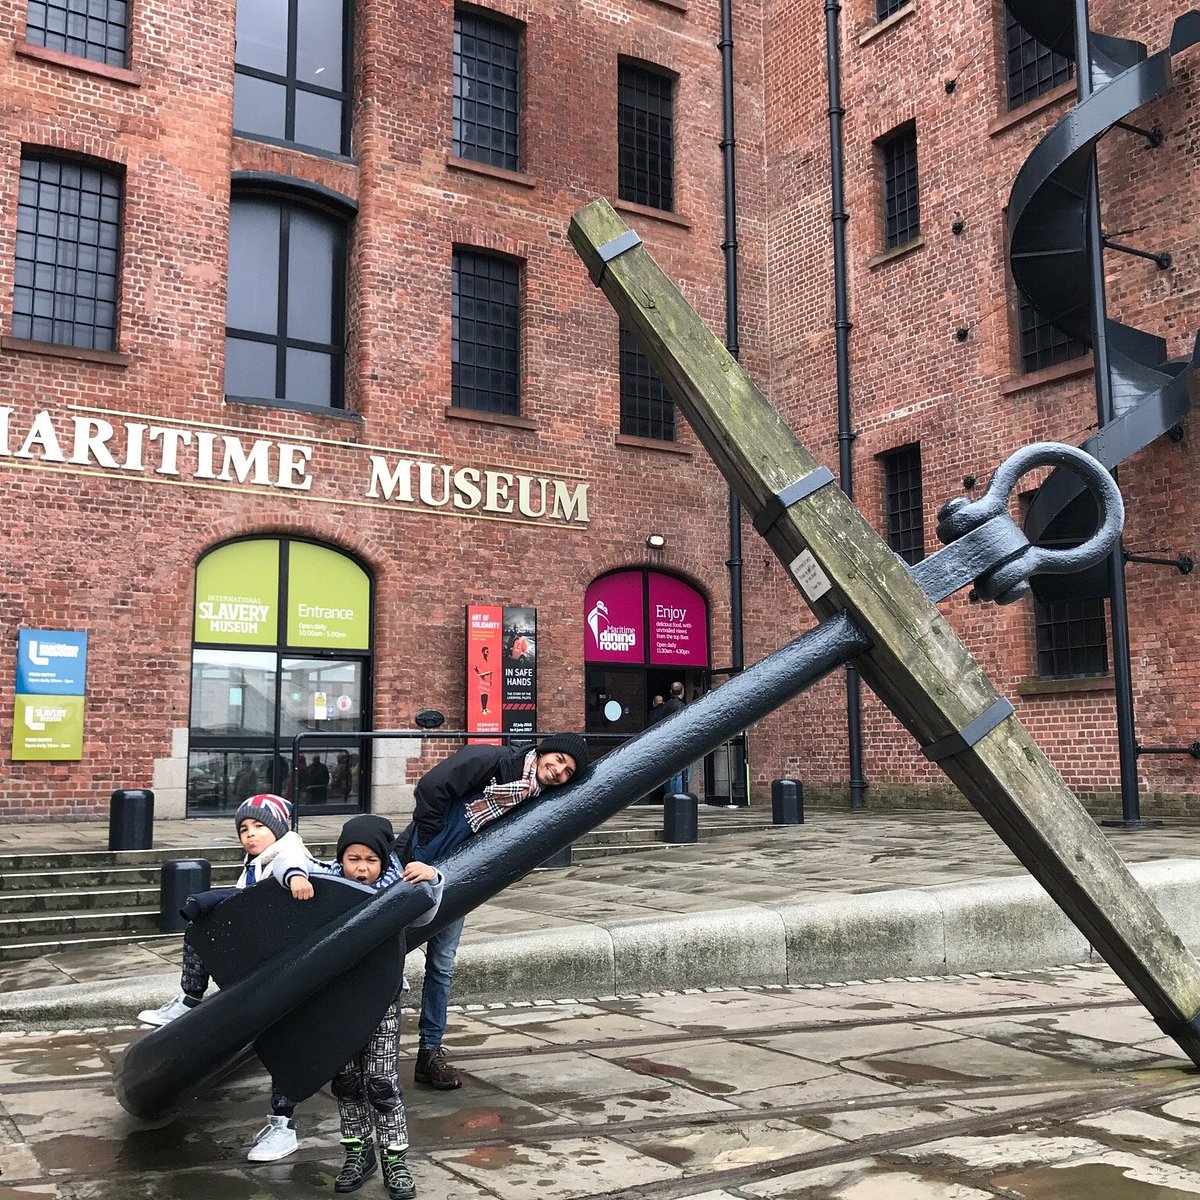 Merseyside Maritime Museum Liverpool All You Need To Know Before You Go